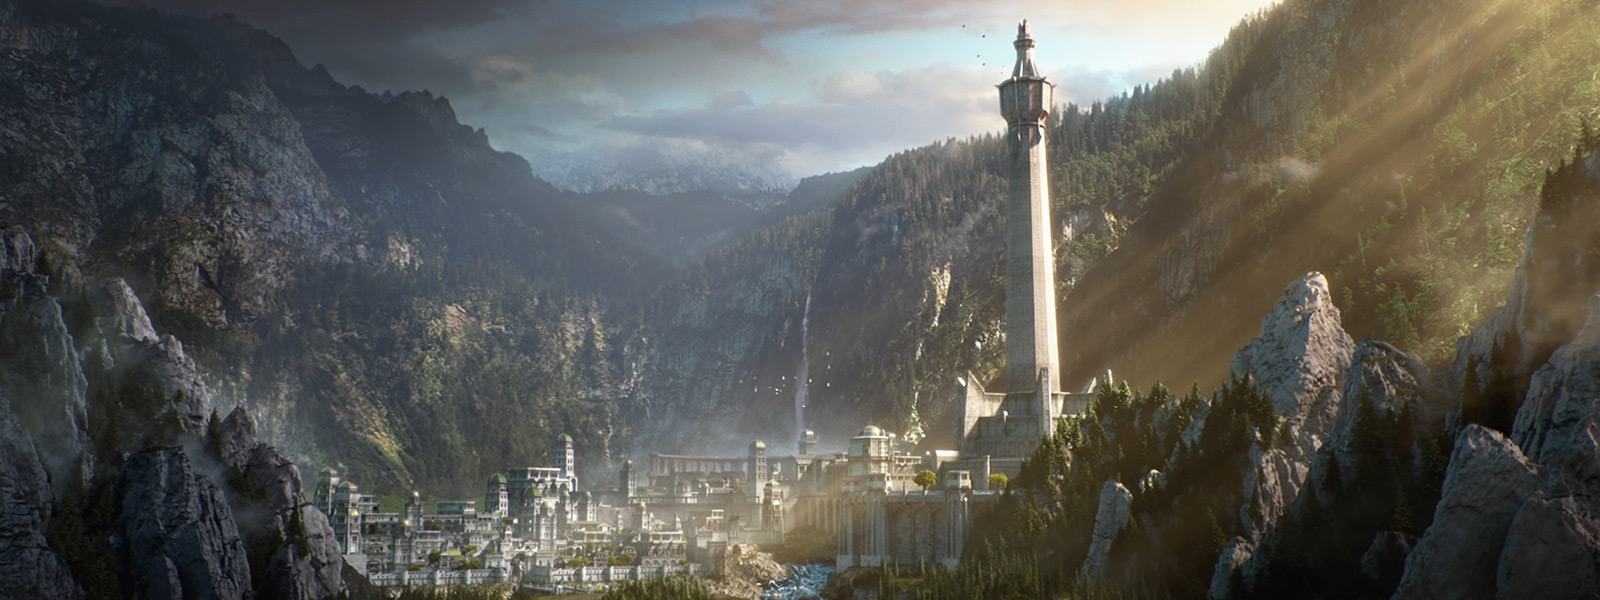 Sun shining on the white marble city of Minas Ithil from the game Middle-earth: Shadow of War